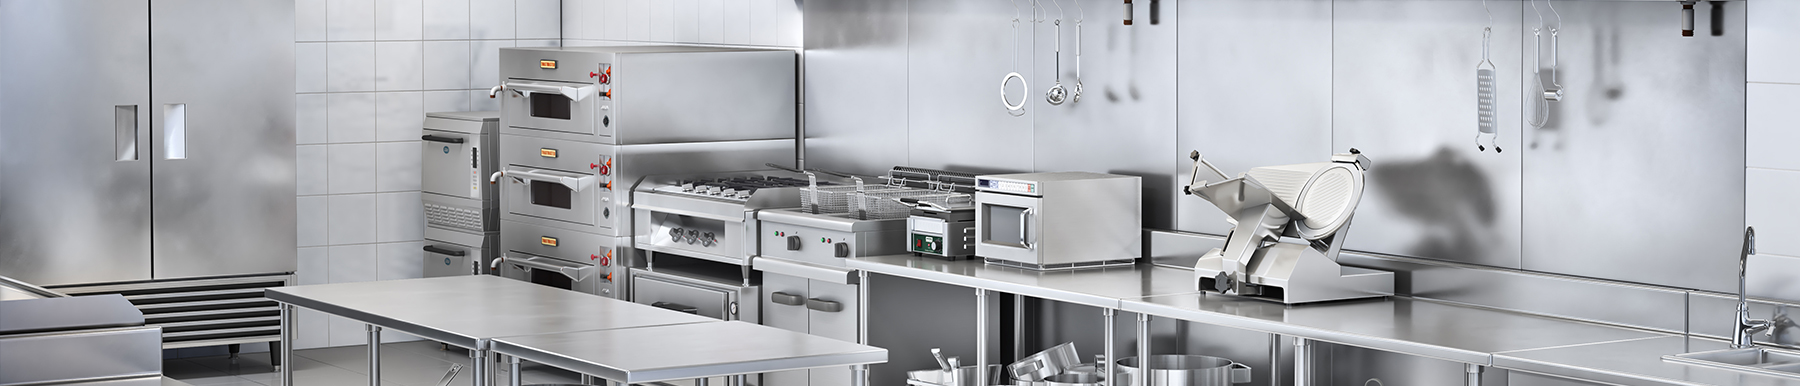 Catering Equipment Suppliers near Swansea | H2 Catering Equipment Catering Equipment